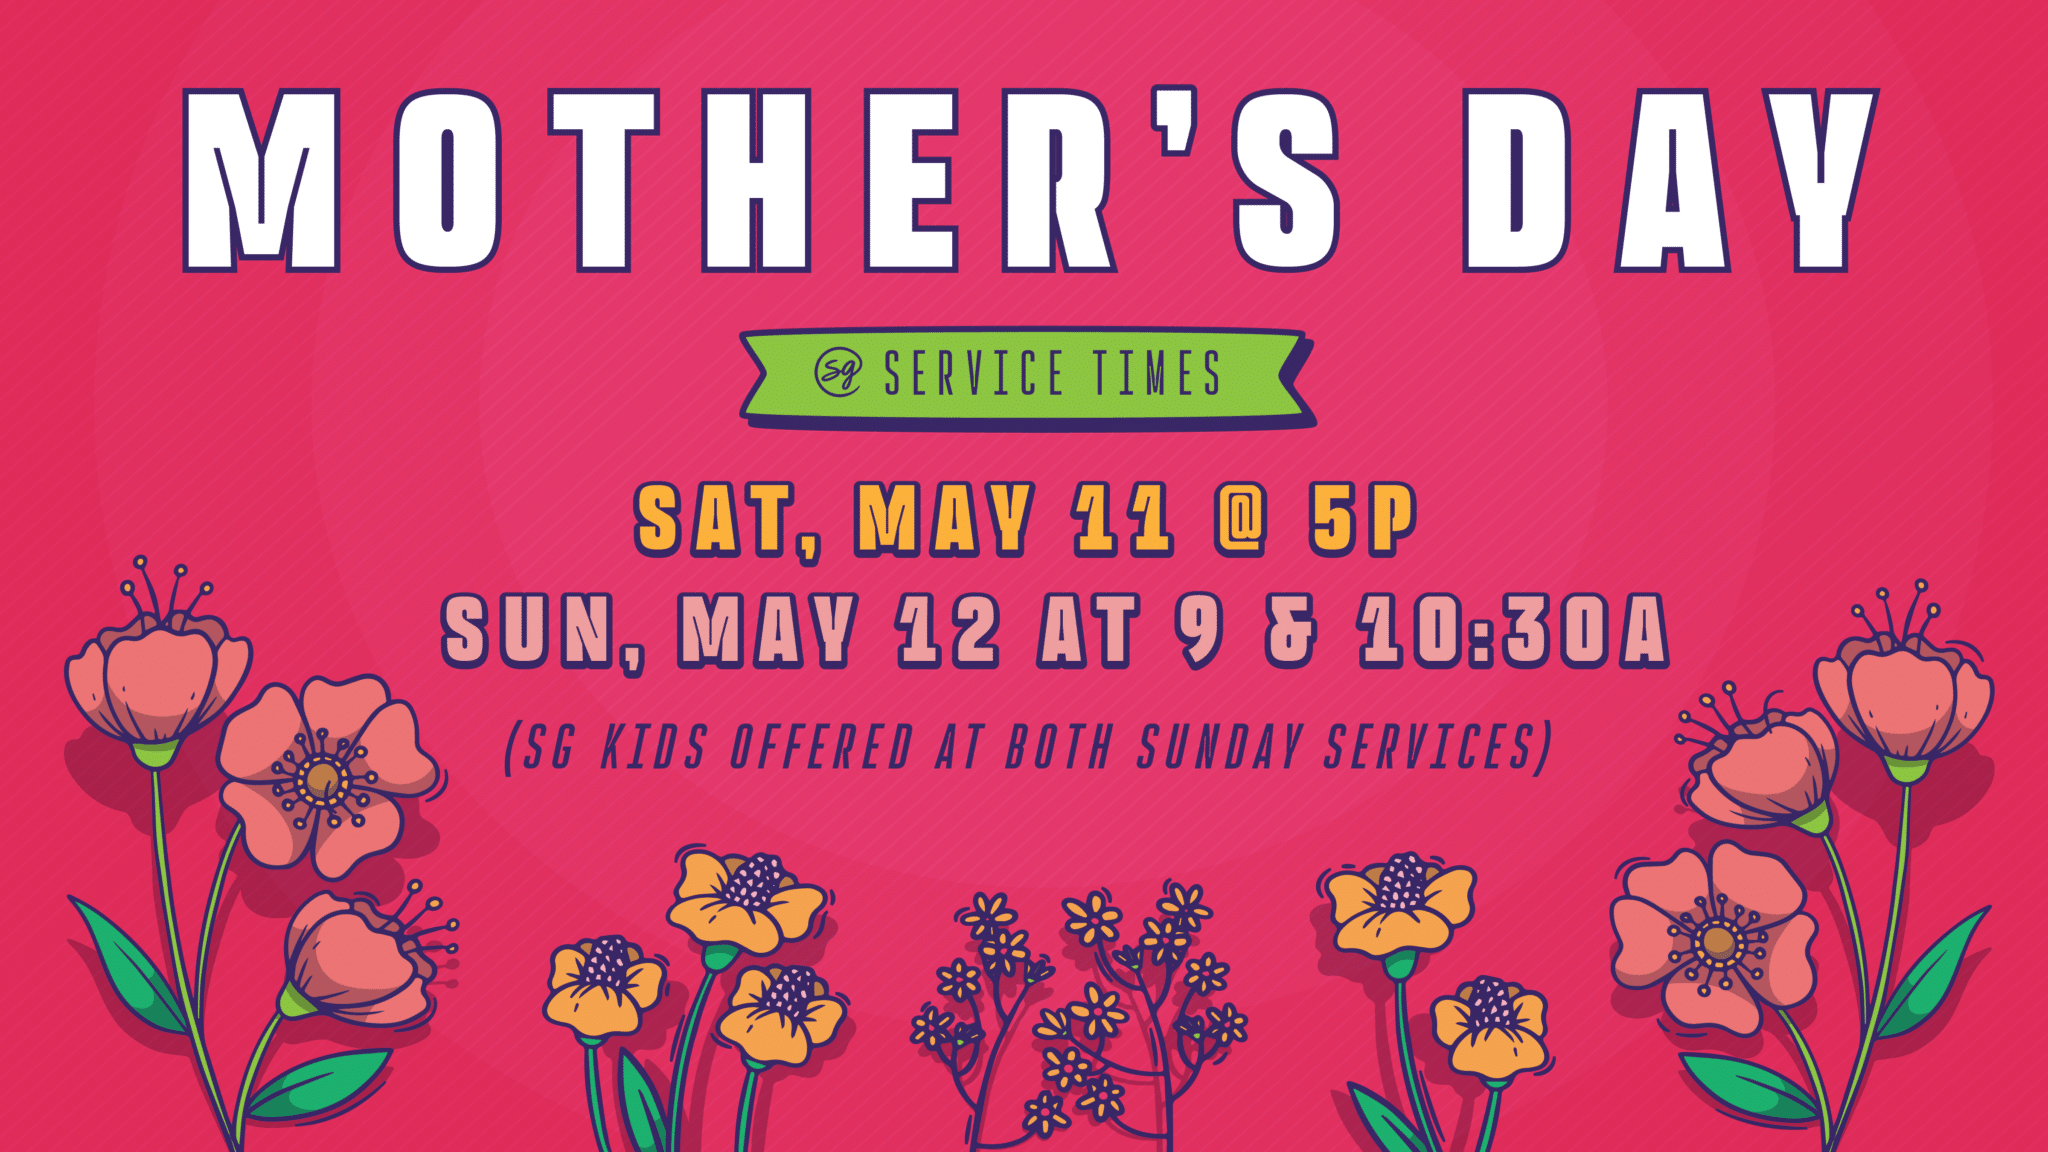 flowers and text with mothers day service info